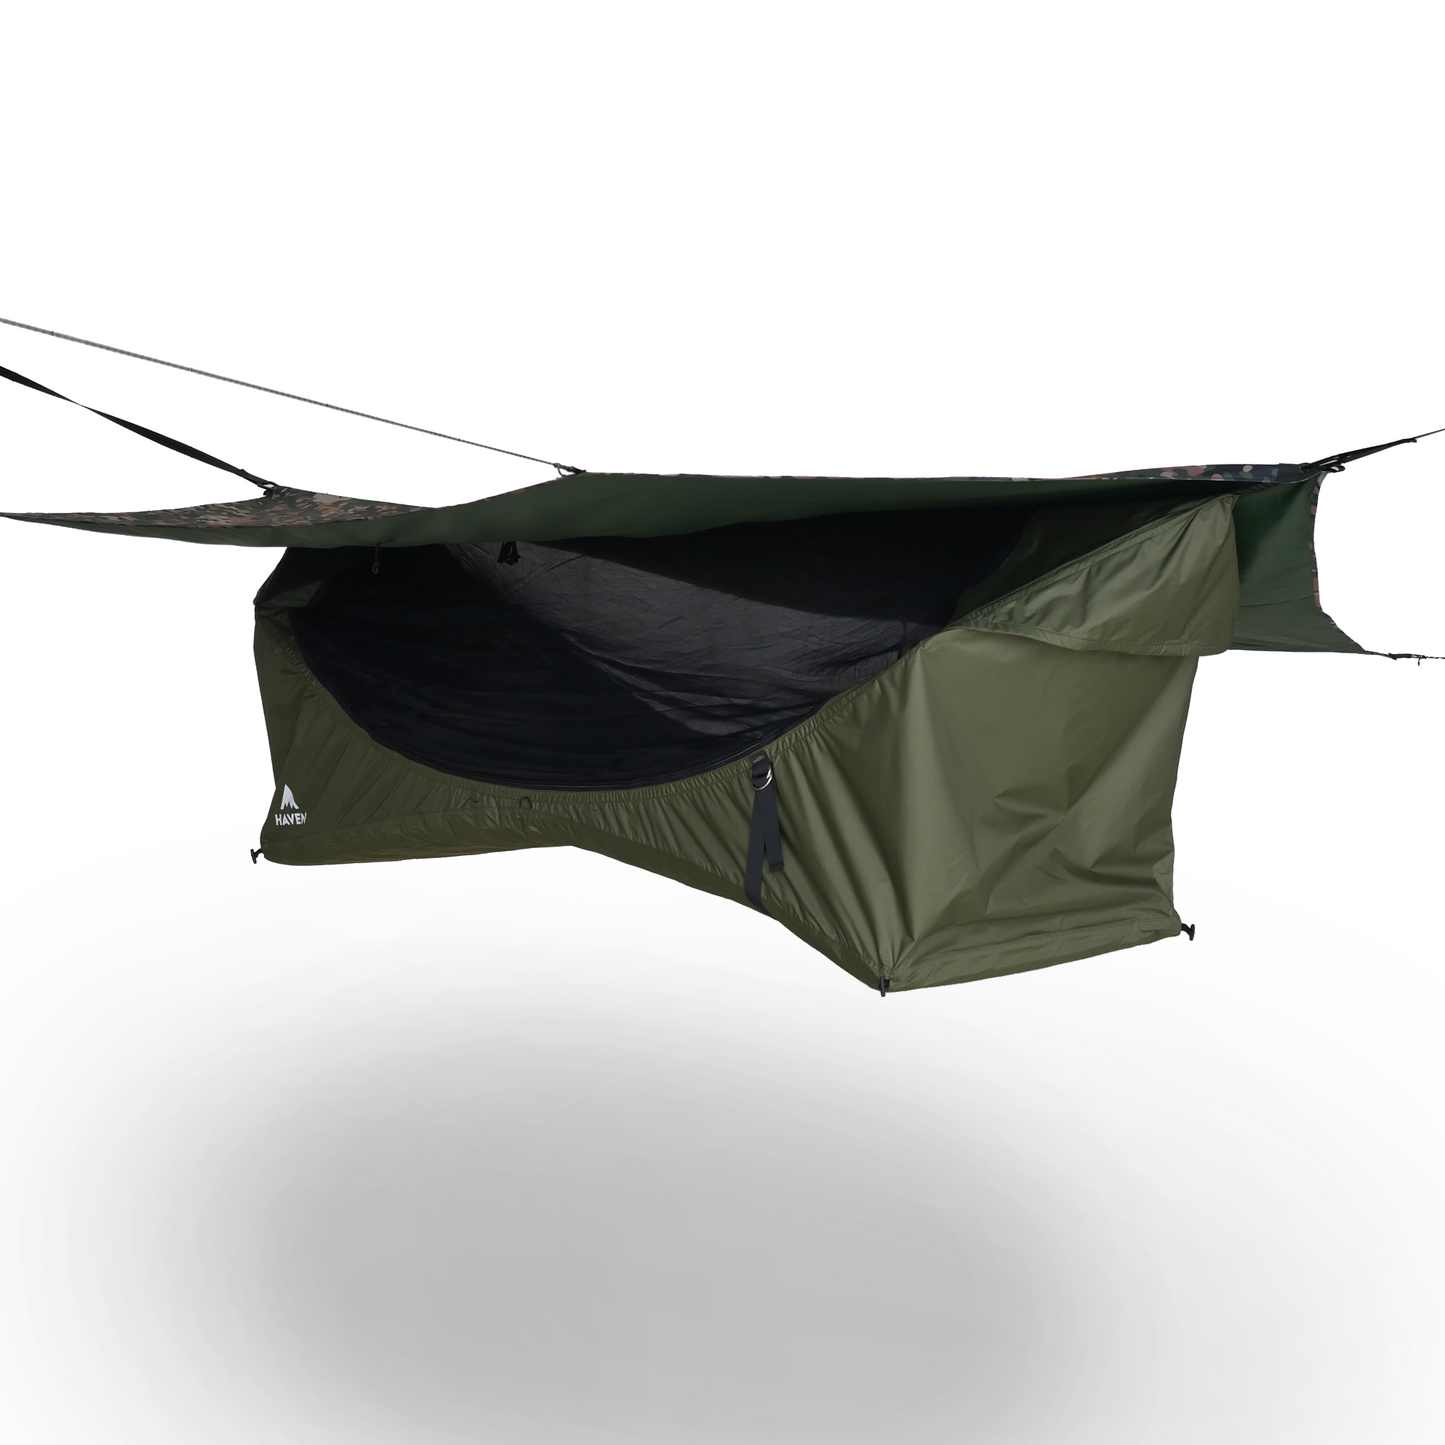 Forest green camping hammock kit with camouflage rainfly 